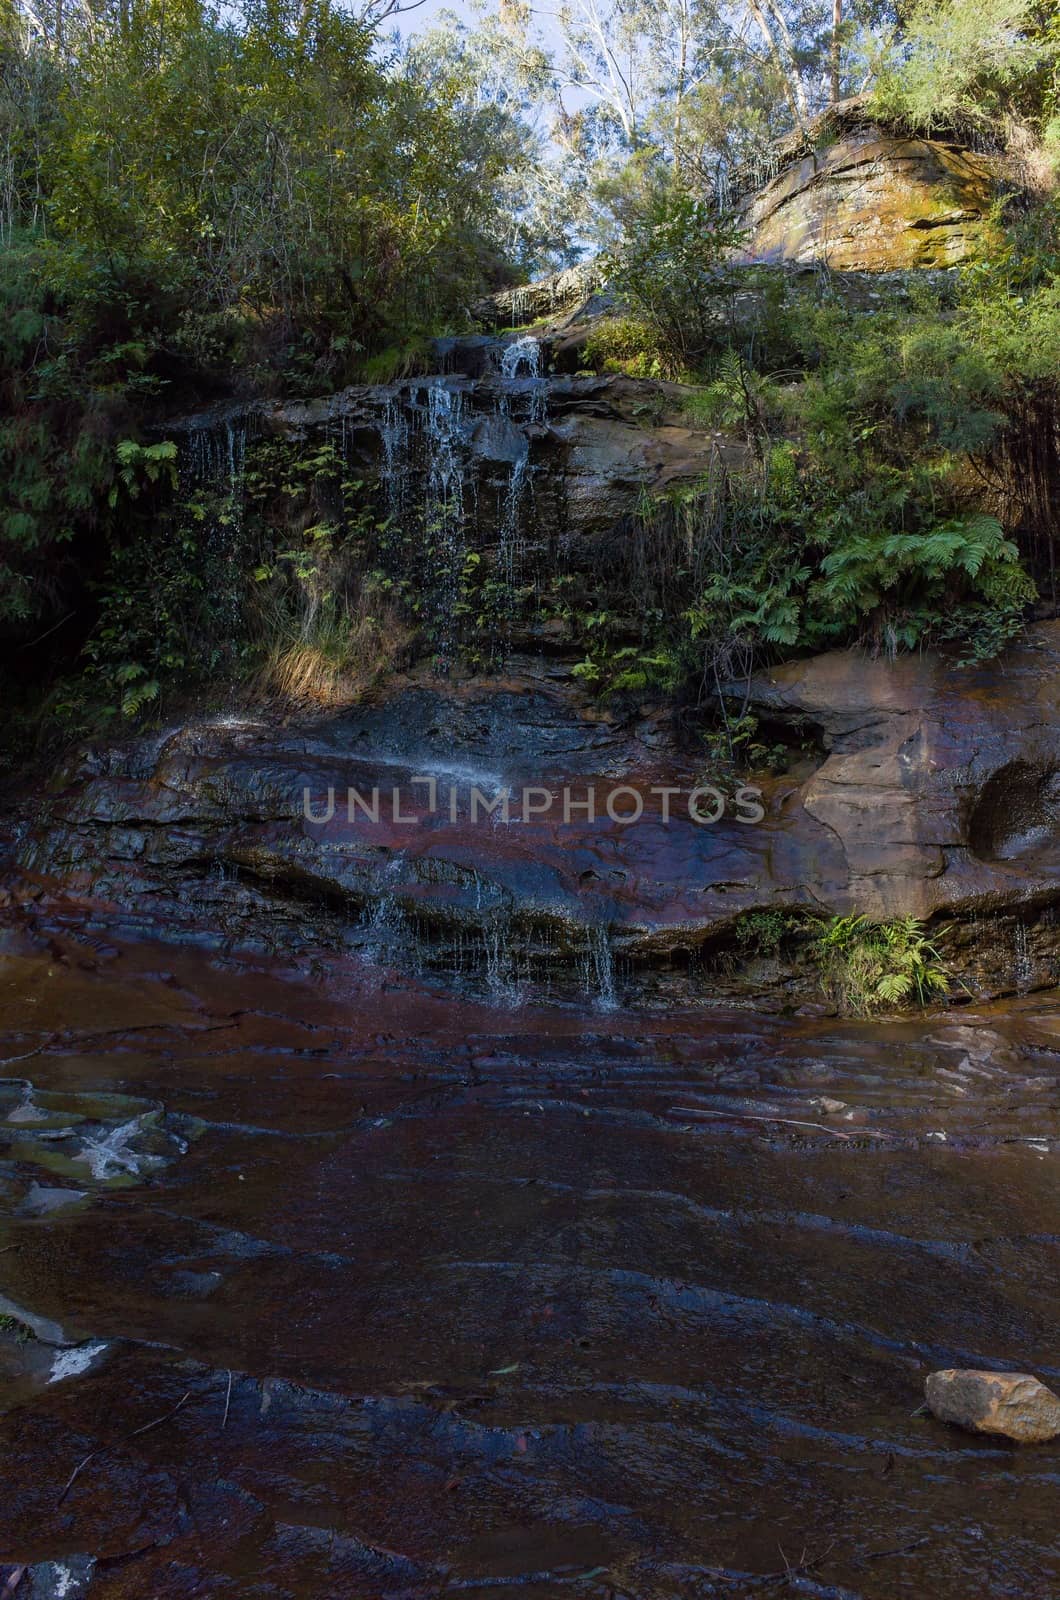 Cataract Falls in the Blue Mountains, Australia by jaaske